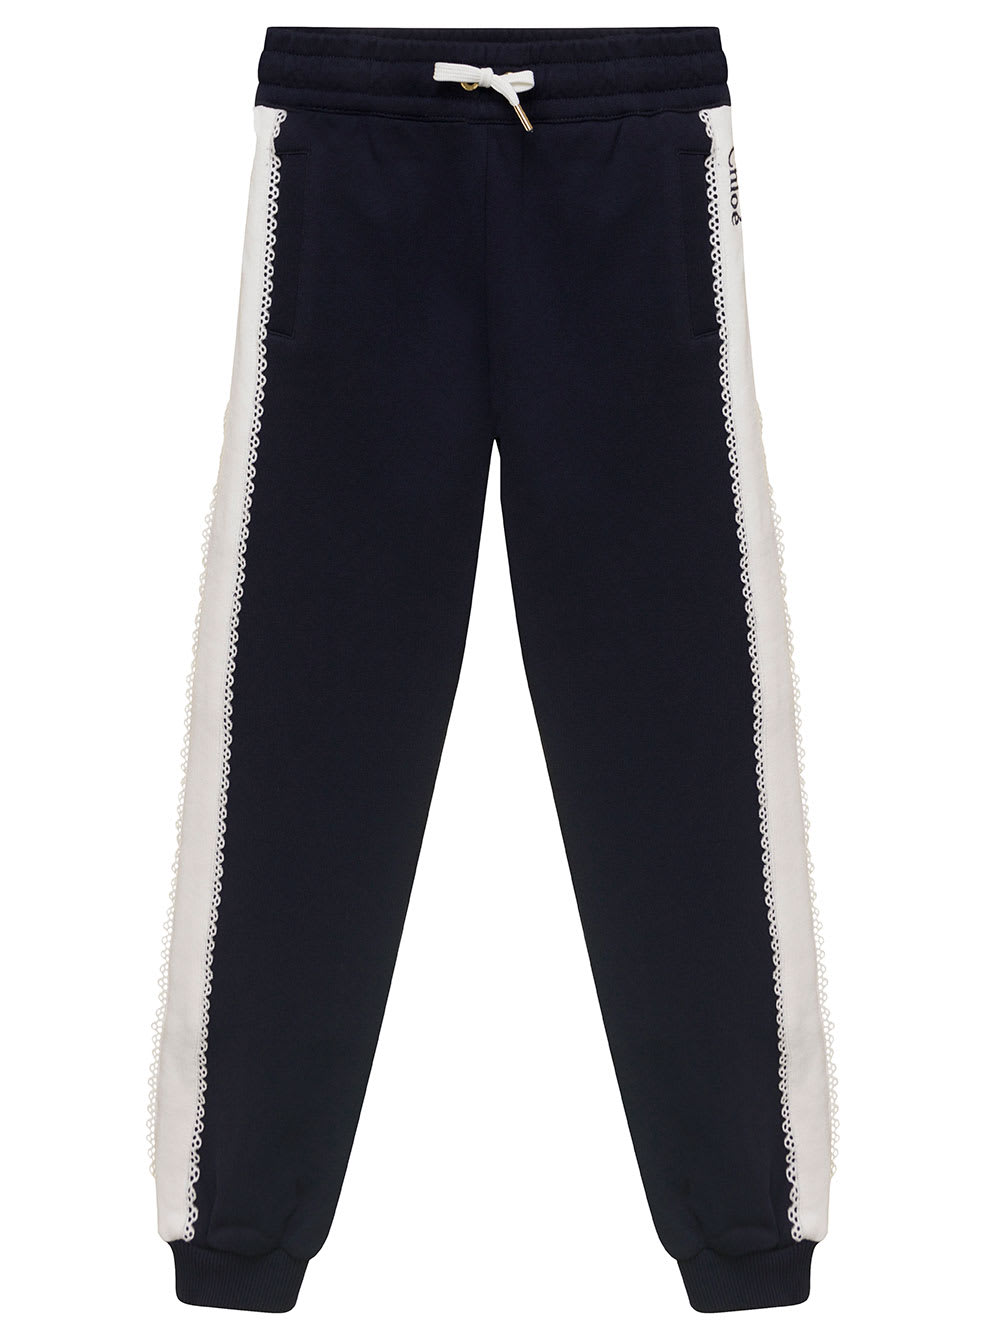 CHLOÉ BLACK JOGGER PANTS WITH CONTRASTING LOGO BAND IN COTTON GIRL